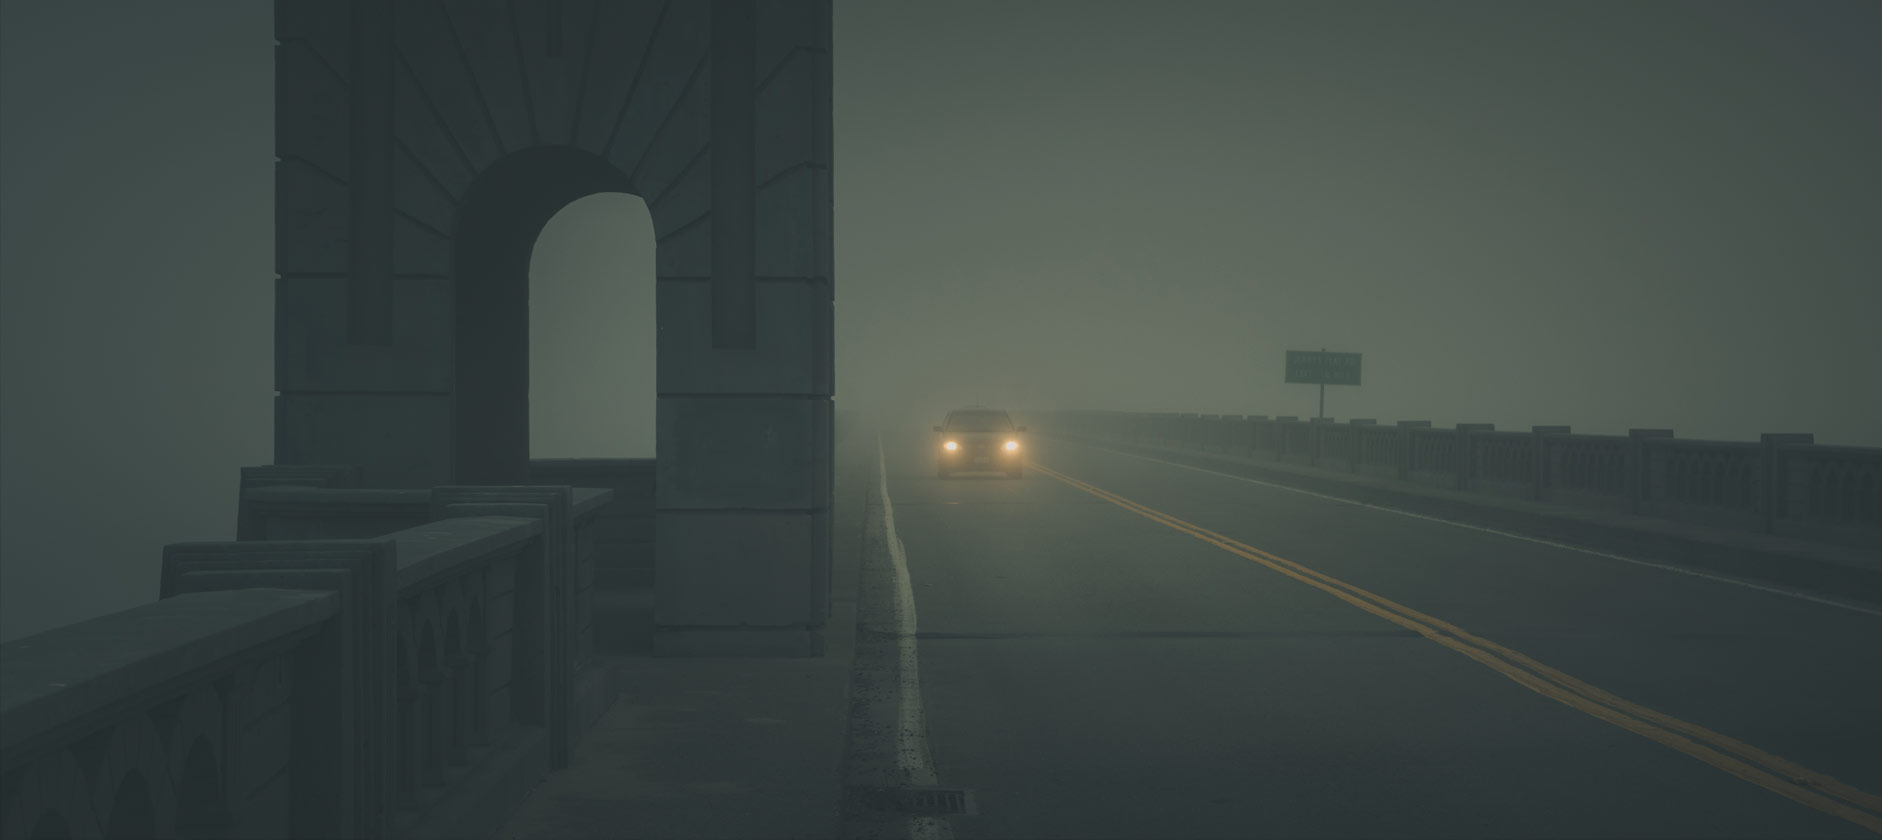 Lost In The Mist: A Photoseries